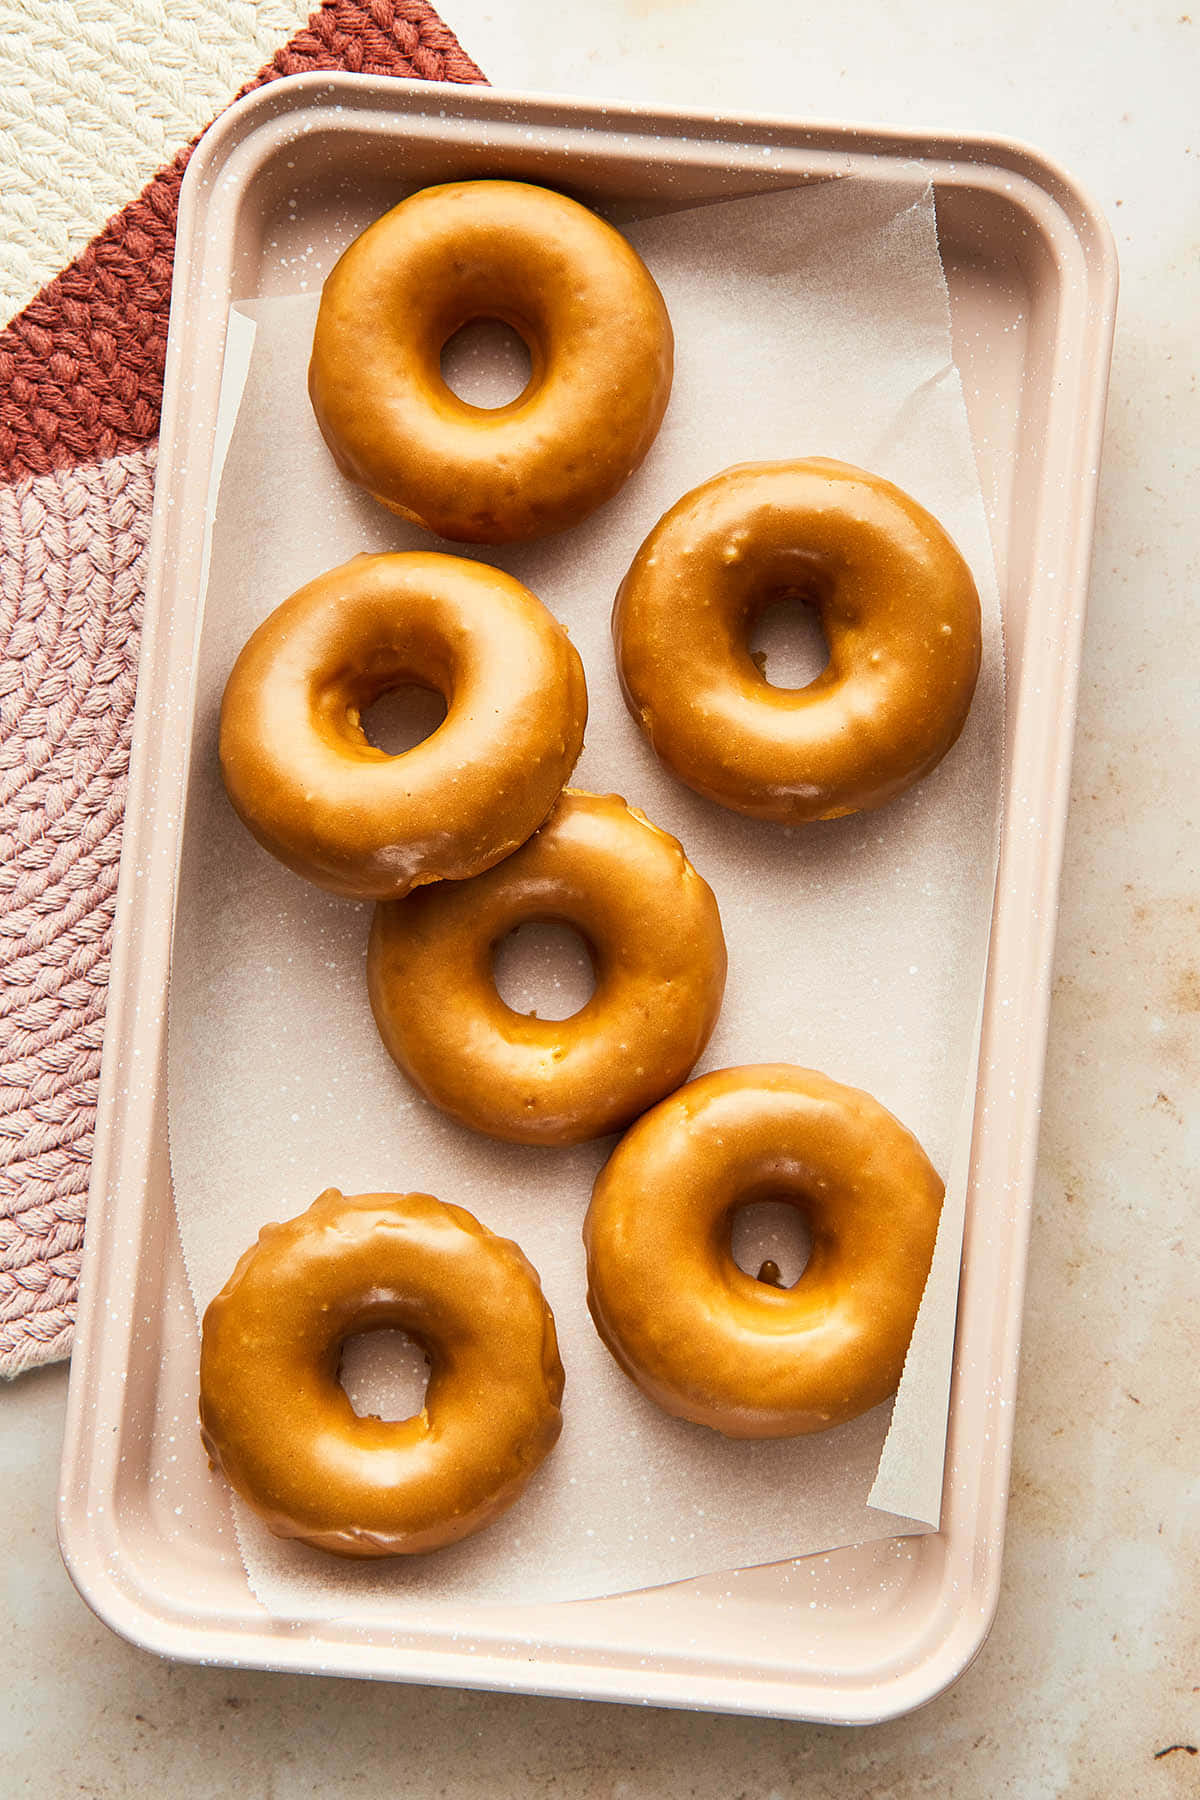 Tempt your taste buds with this delicious glazed donut Wallpaper